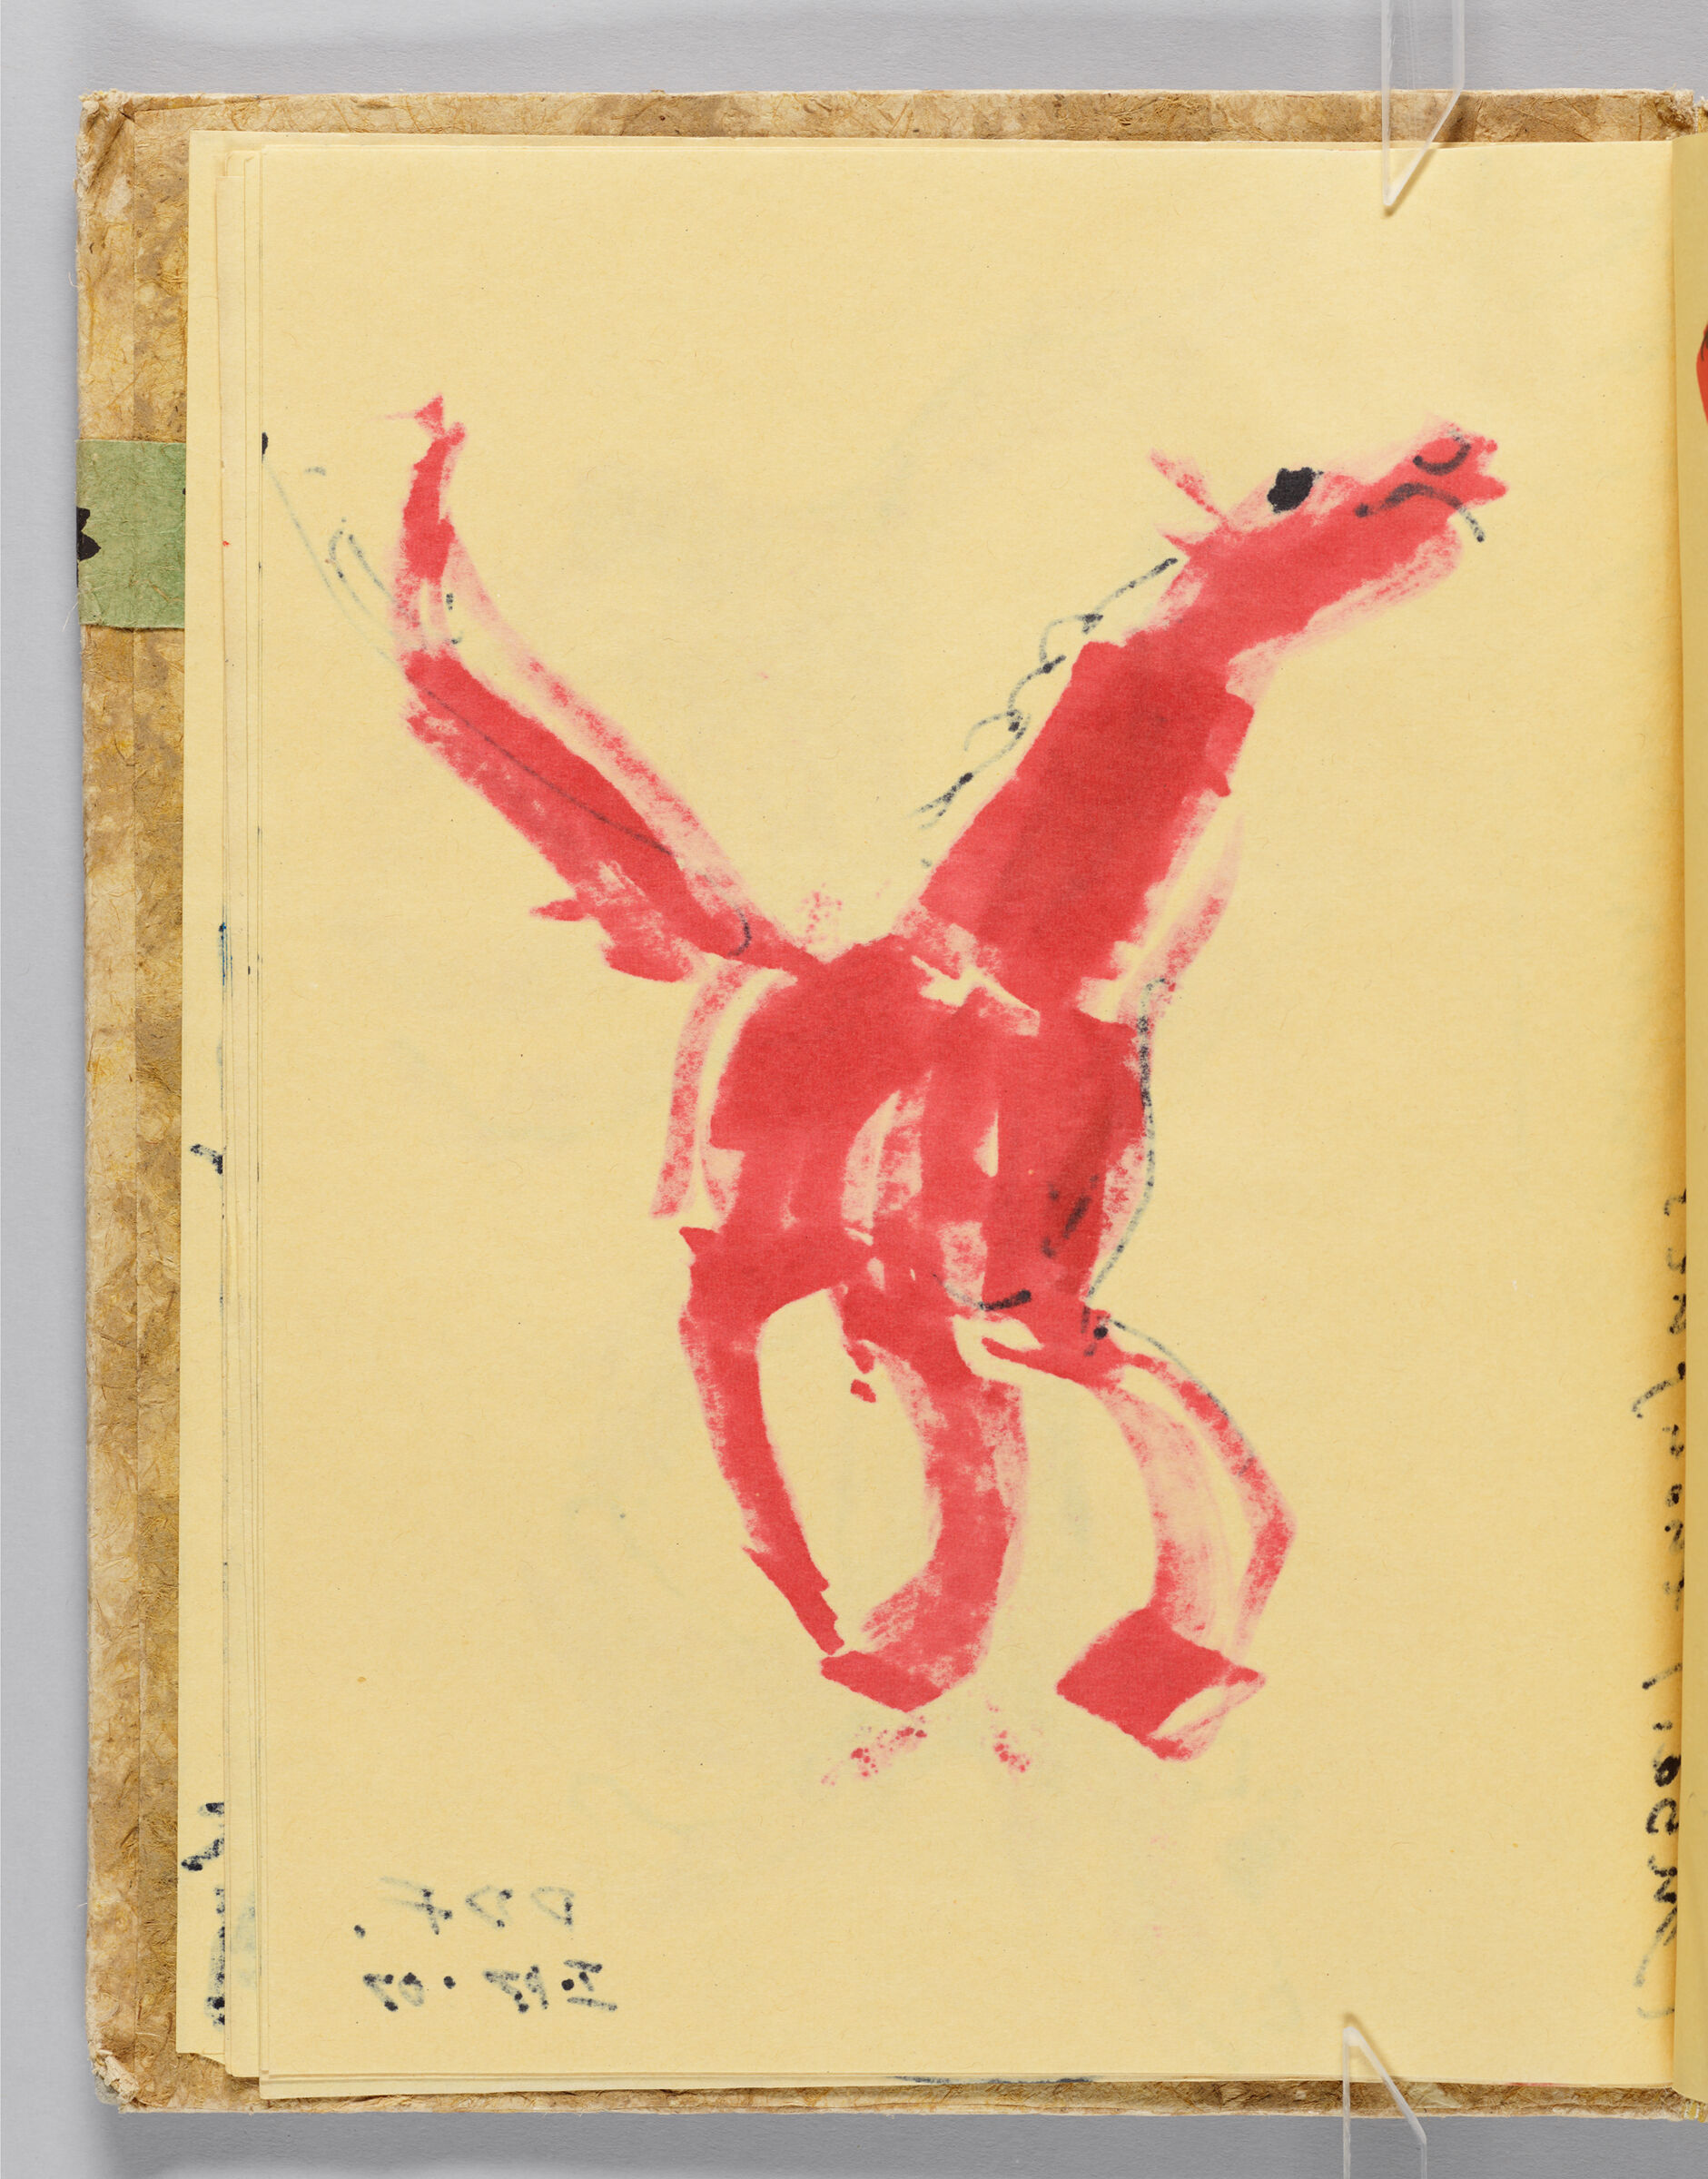 Untitled (Bleed-Through Of Previous Page With Text, Left Page); Untitled (Red Horse, Right Page)